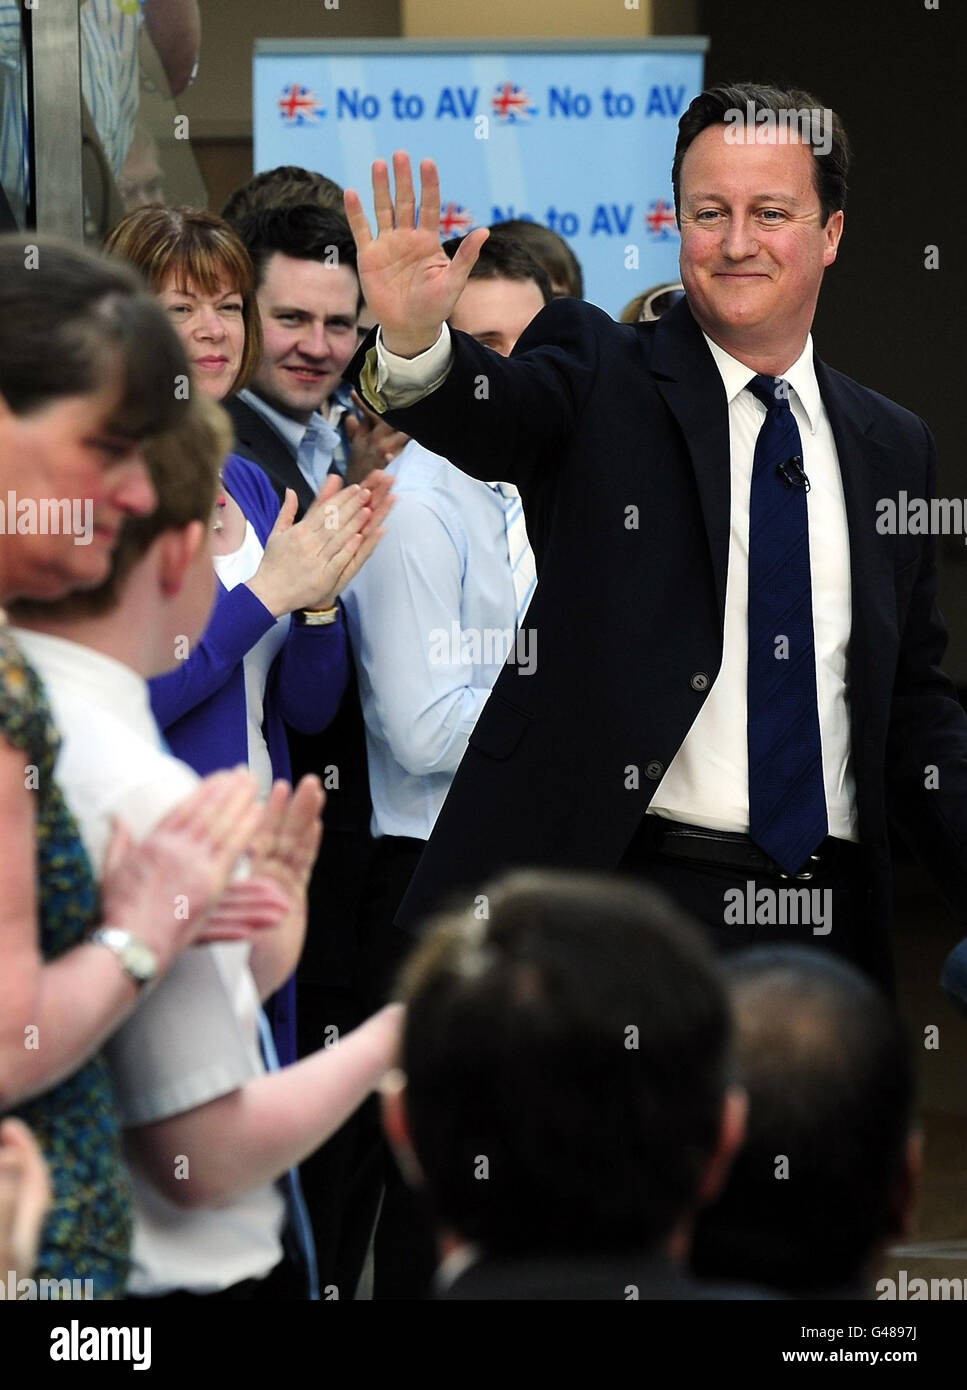 Prime Minister David Cameron at St Aidan's Church of England Academy in Darlington, where he gave a speech to party supporters ahead of the Local Elections. Stock Photo